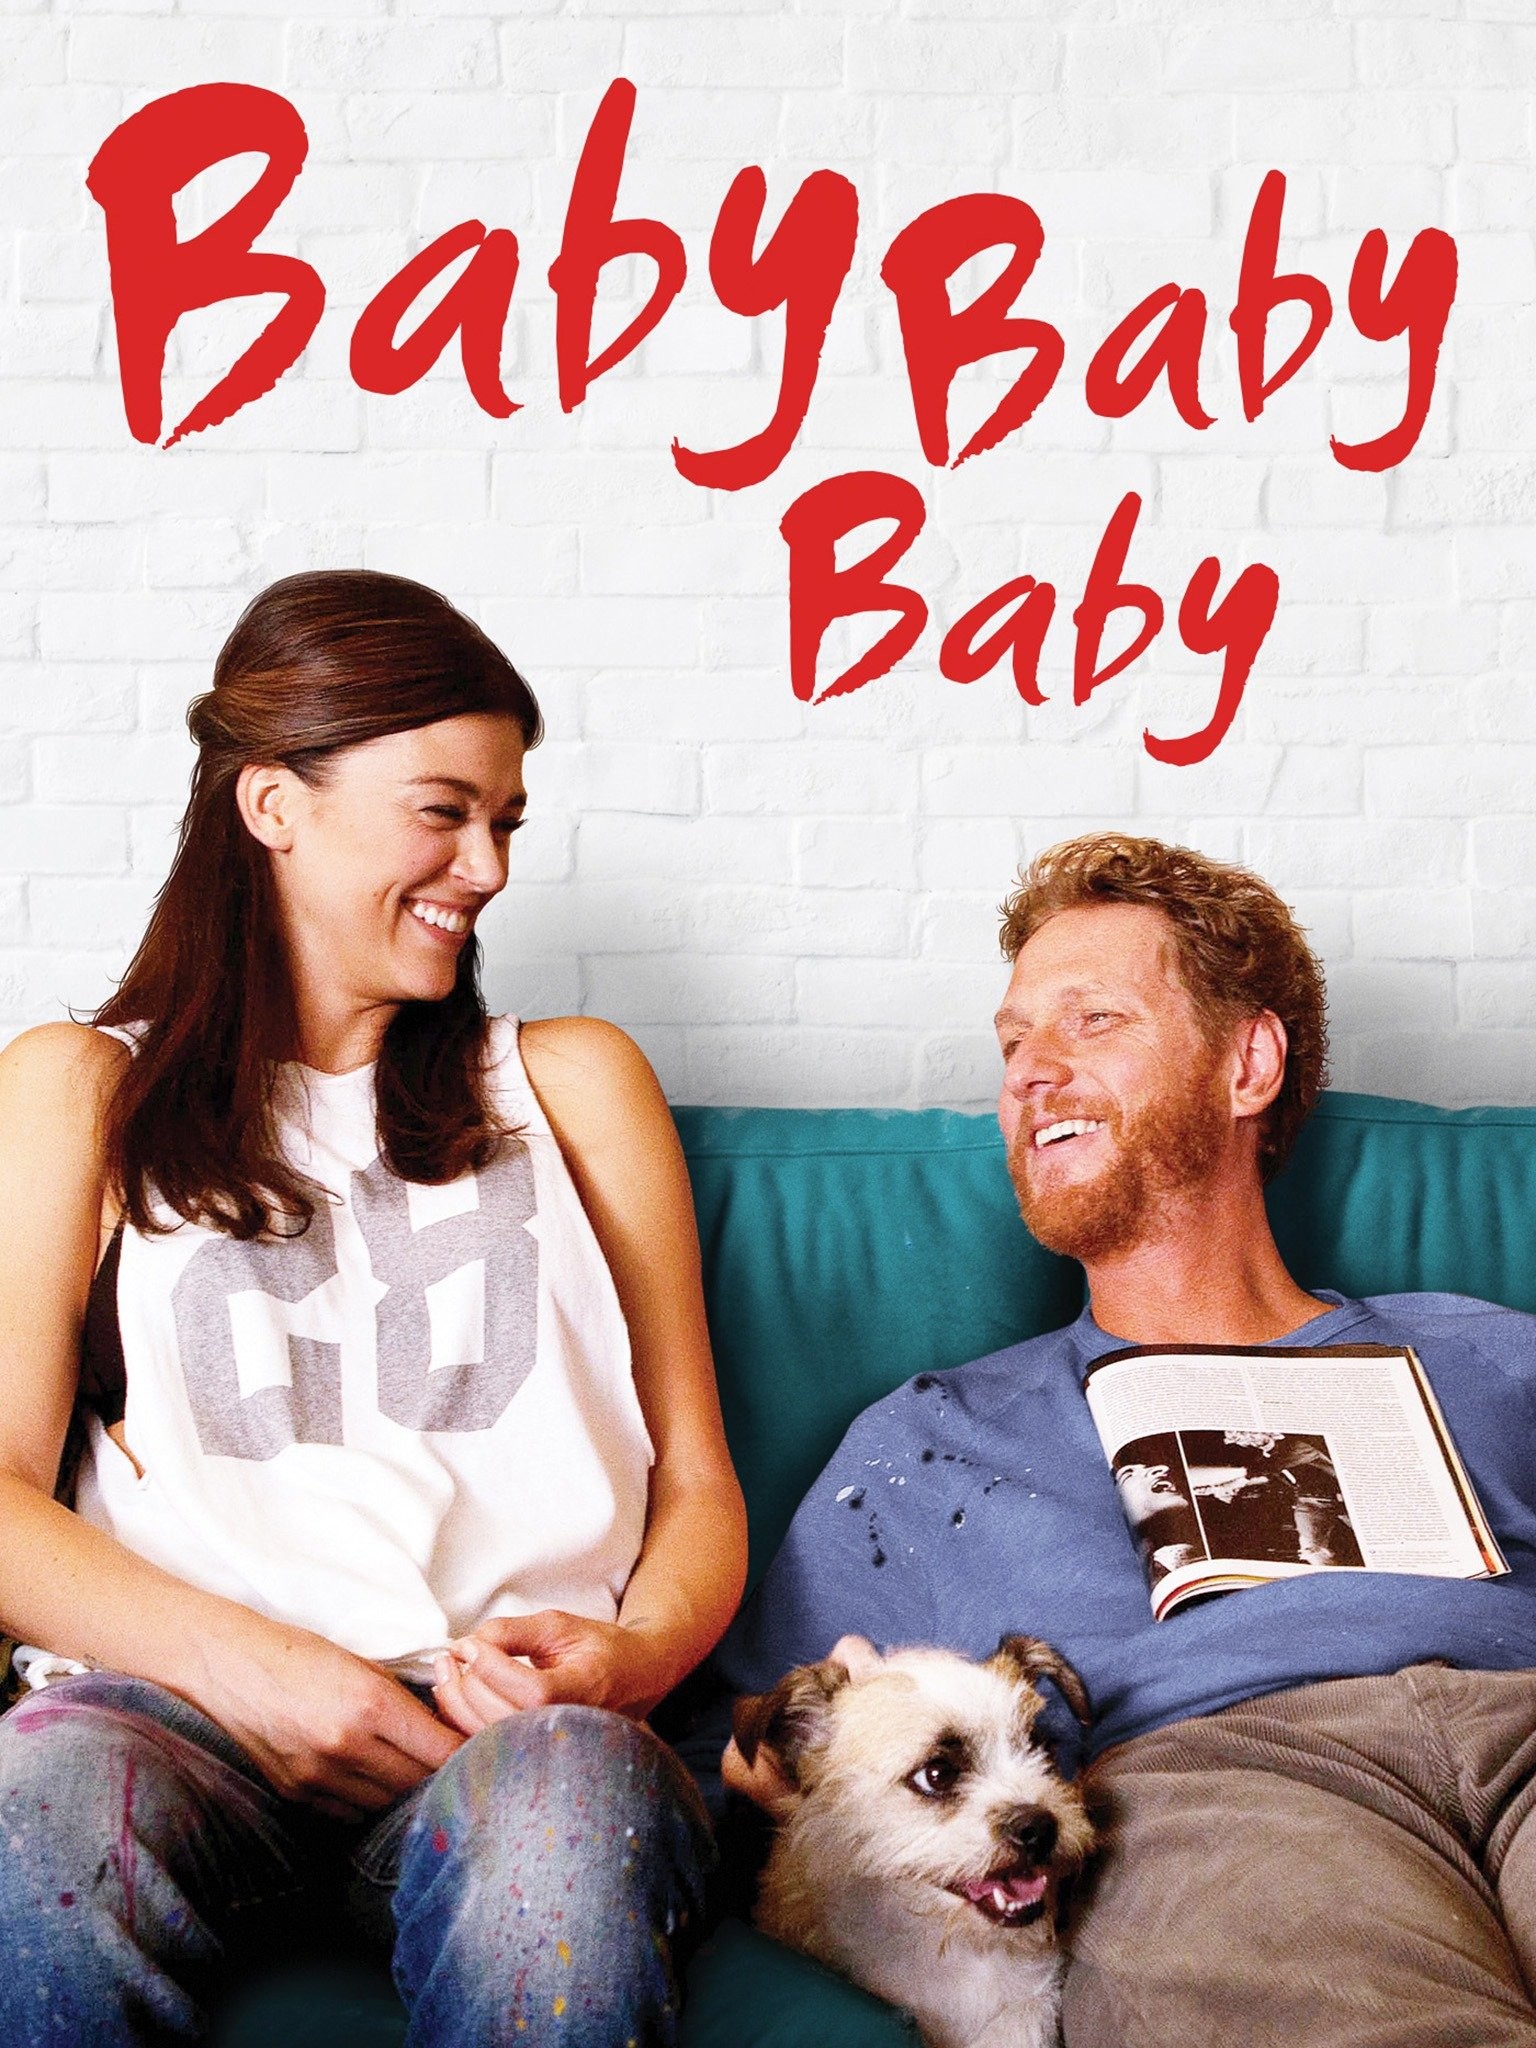 Baby and Me  Rotten Tomatoes